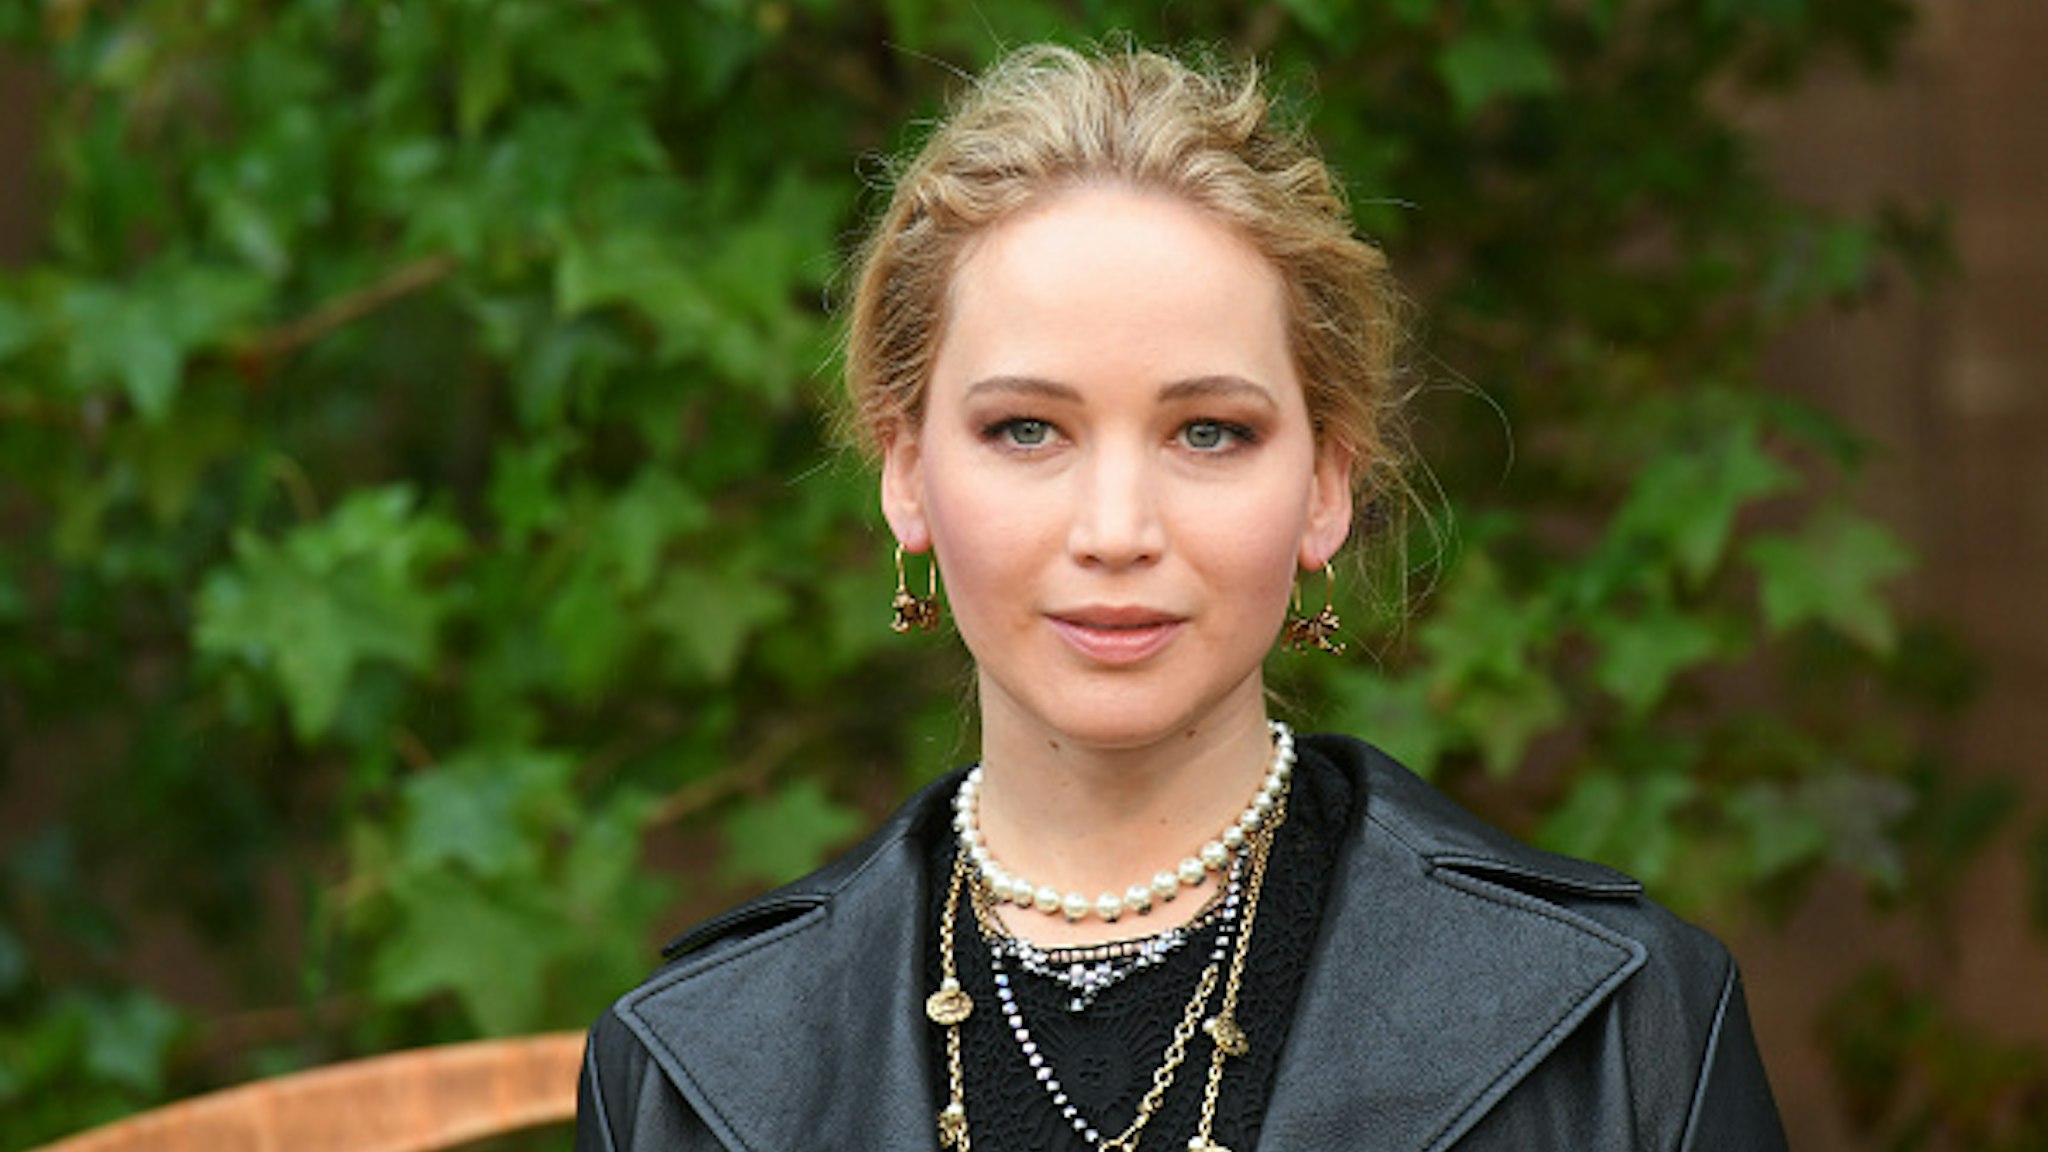 PARIS, FRANCE - SEPTEMBER 24: Jennifer Lawrence attends the Christian Dior Womenswear Spring/Summer 2020 show as part of Paris Fashion Week on September 24, 2019 in Paris, France.